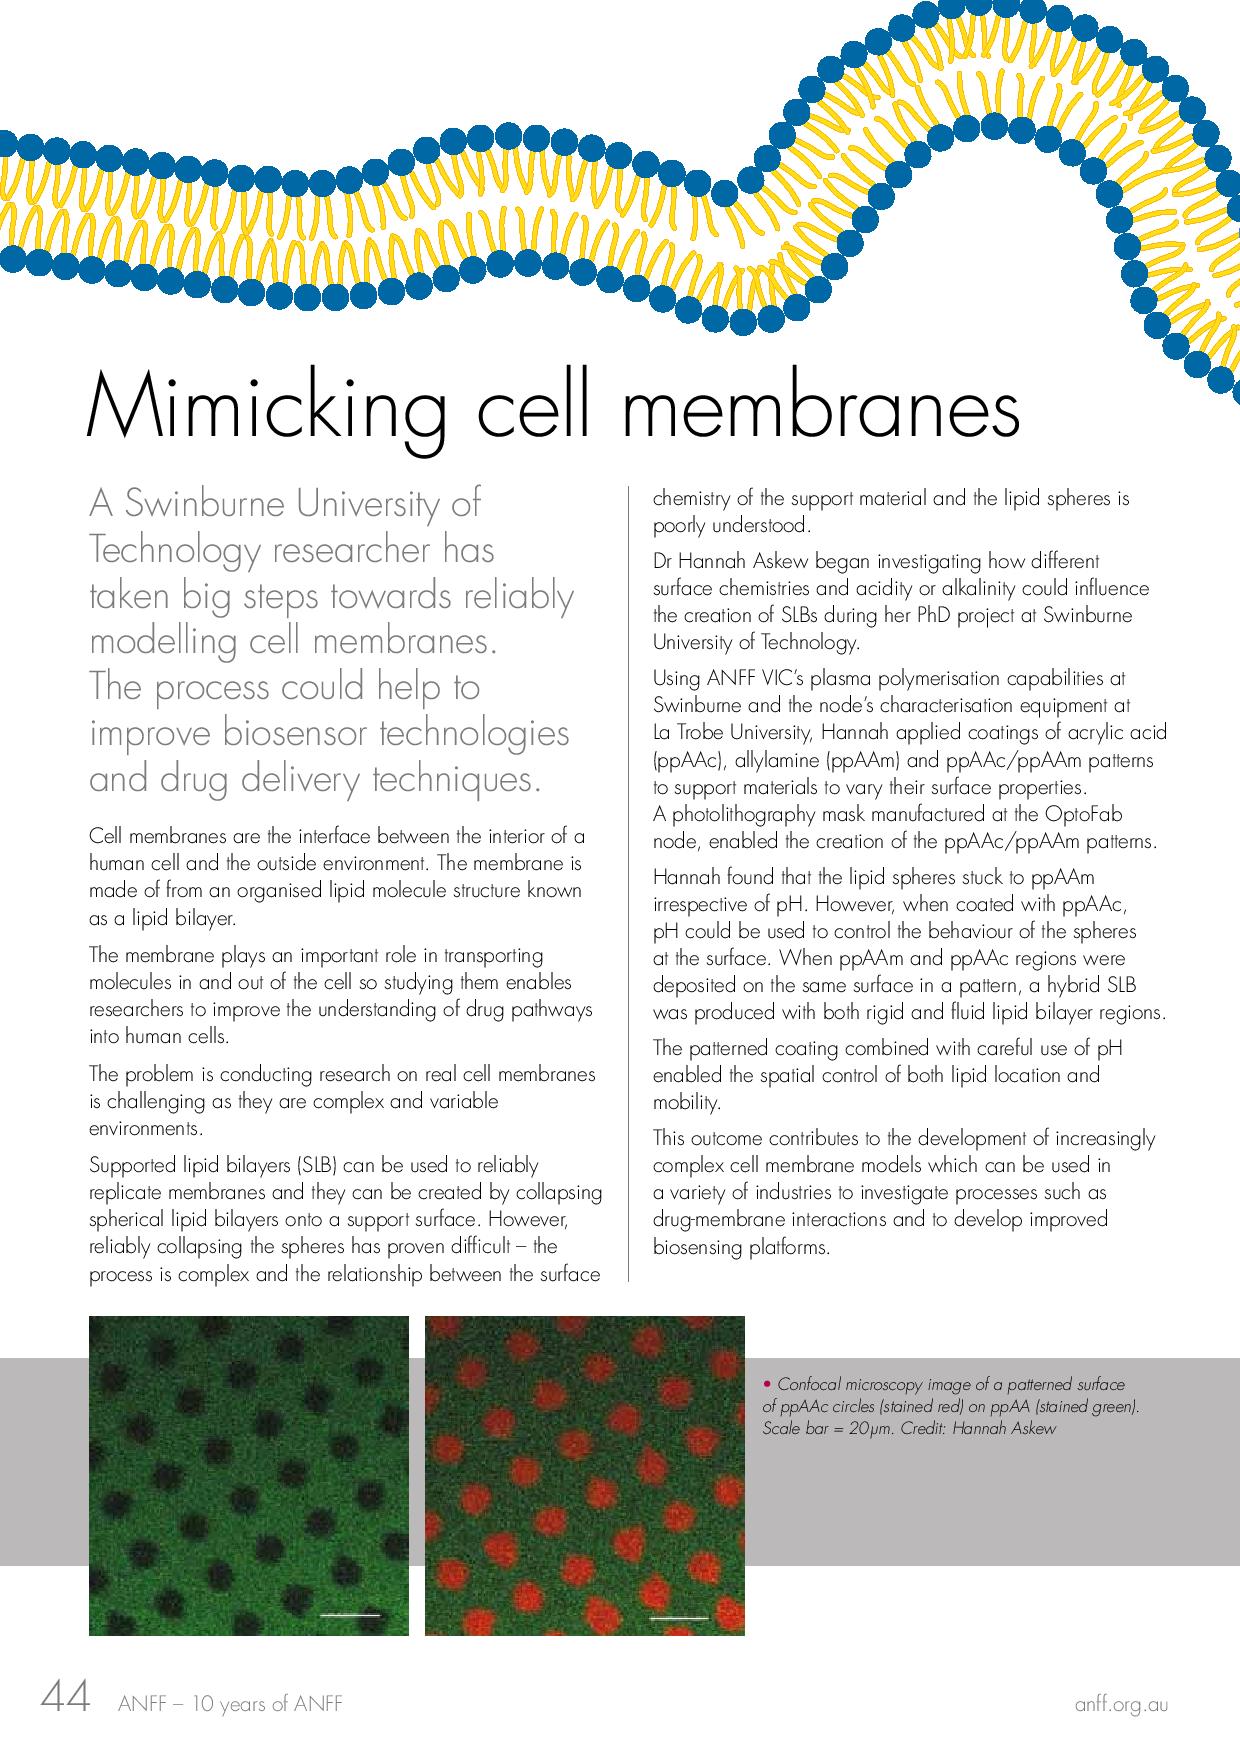 Mimicking cell membranes